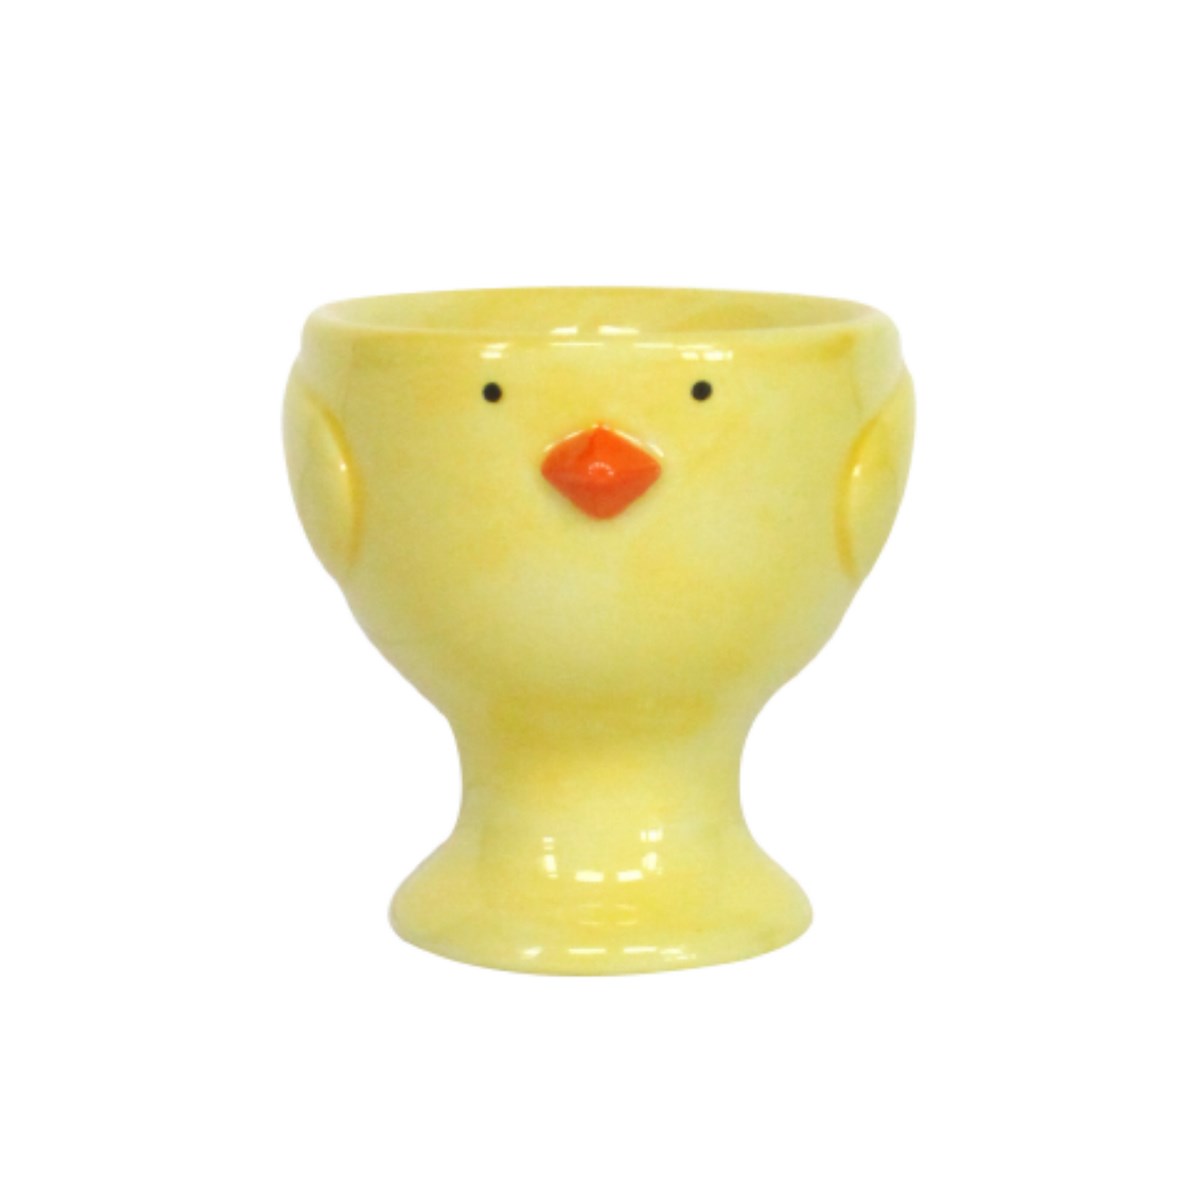 Gisela Graham Yellow Ceramic Chick Easter Egg Cup